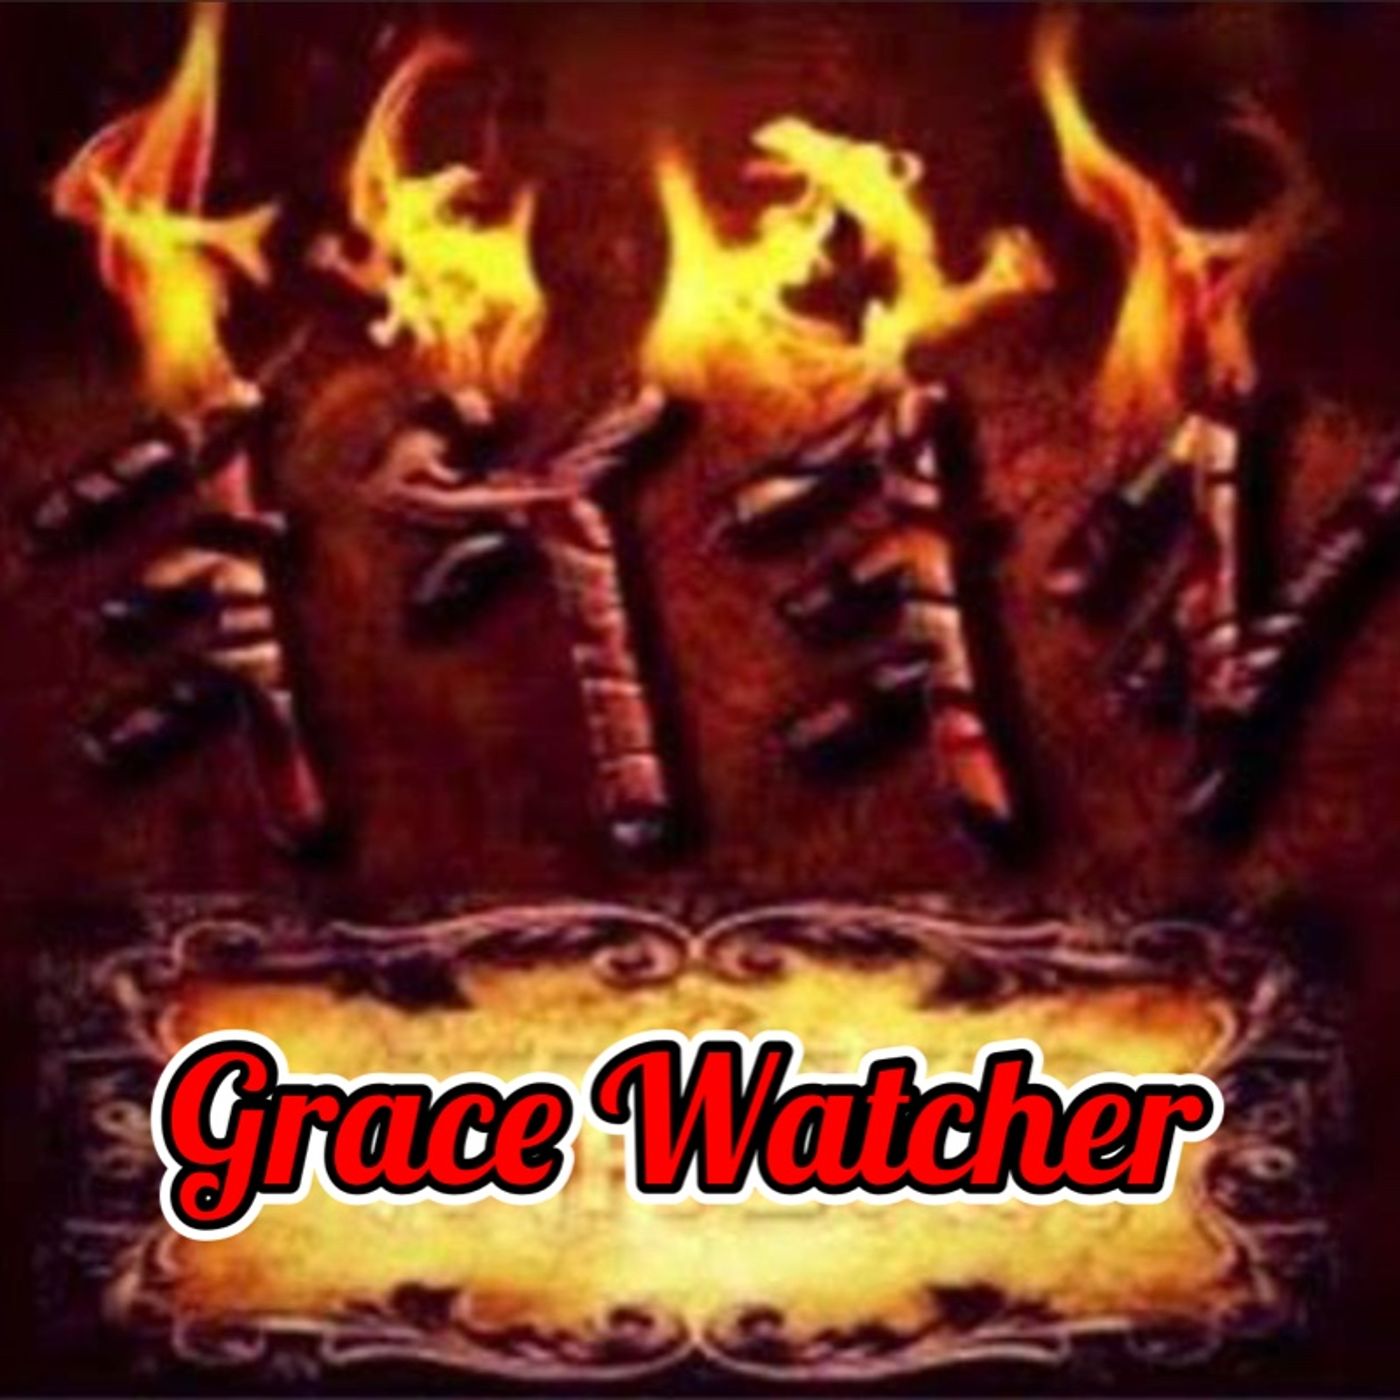 Grace Watcher Worship with Paul Harris - Friday Night Praises with the name of Yahuah